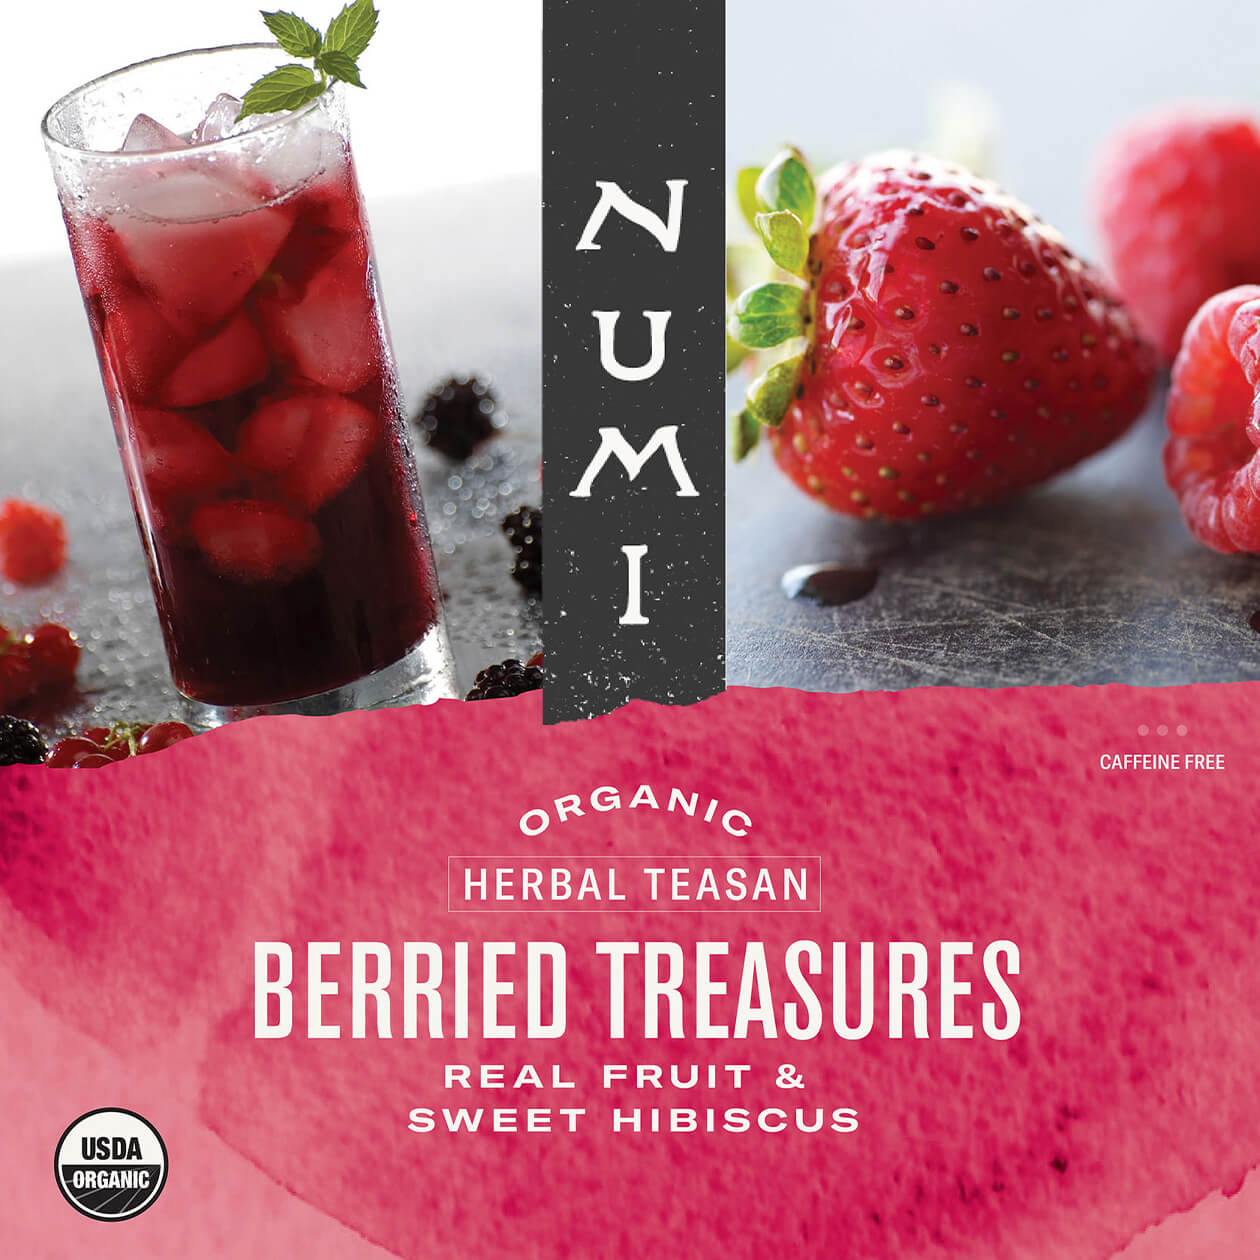 Berried Treasures Iced Tea label, organic and caffeine free, with images of iced tea and fruit